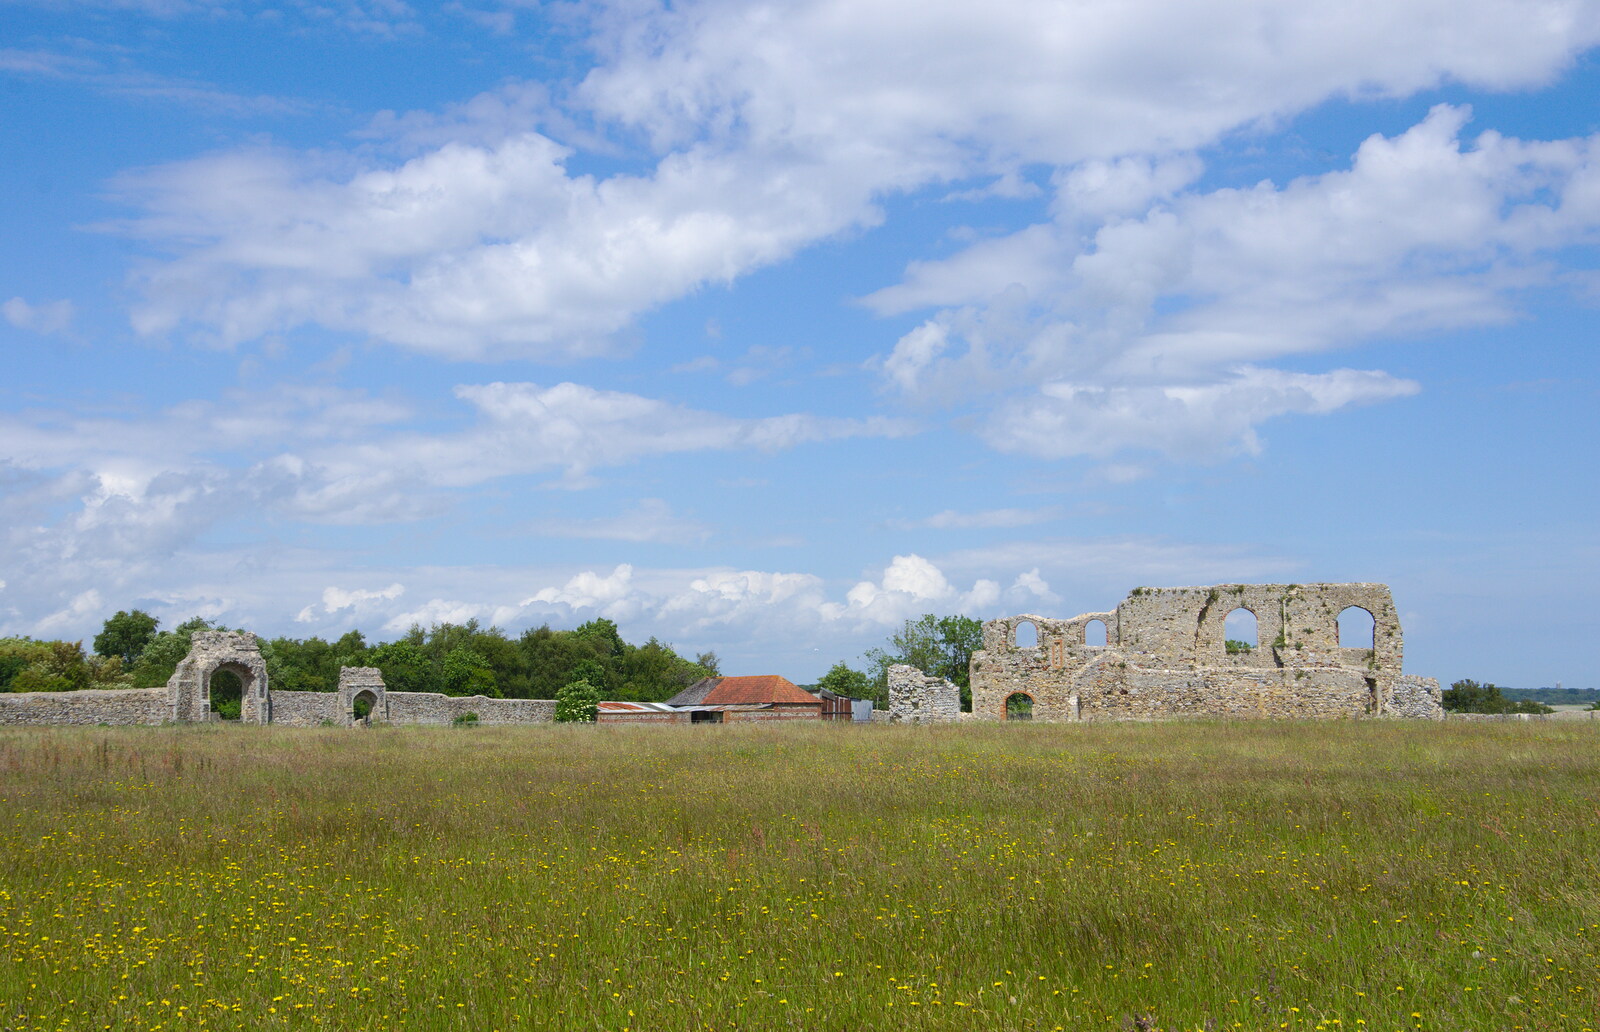 The ruins of Dunwich Abbey from Cliff House Camping, Dunwich, Suffolk - 15th June 2019